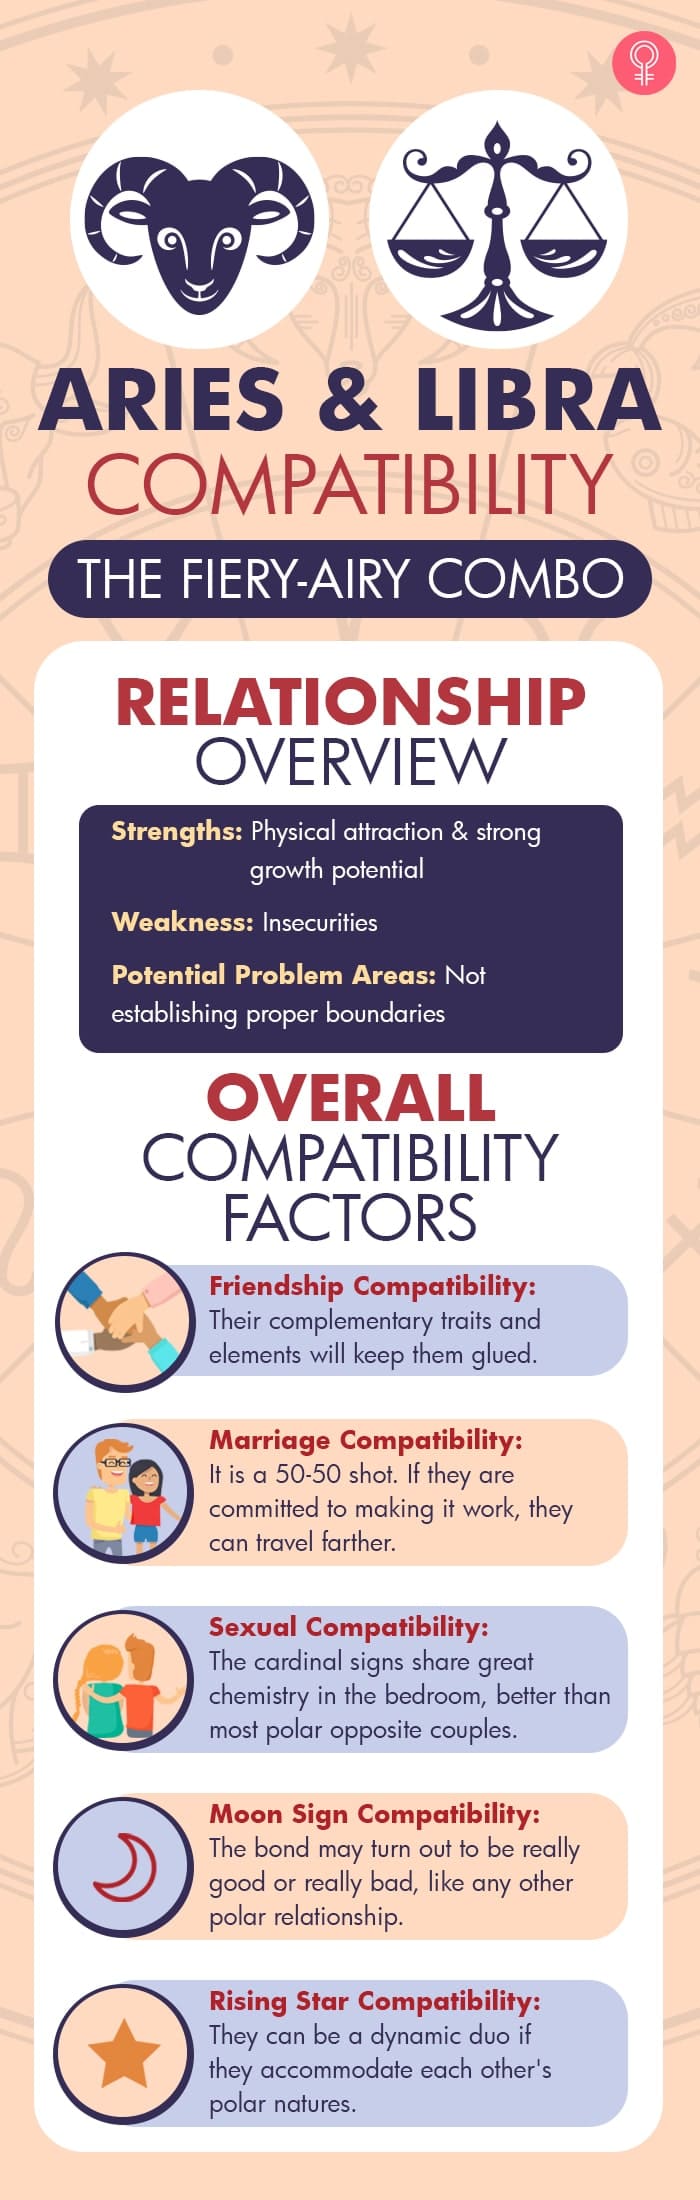 aries and libra compatibility [infographic]